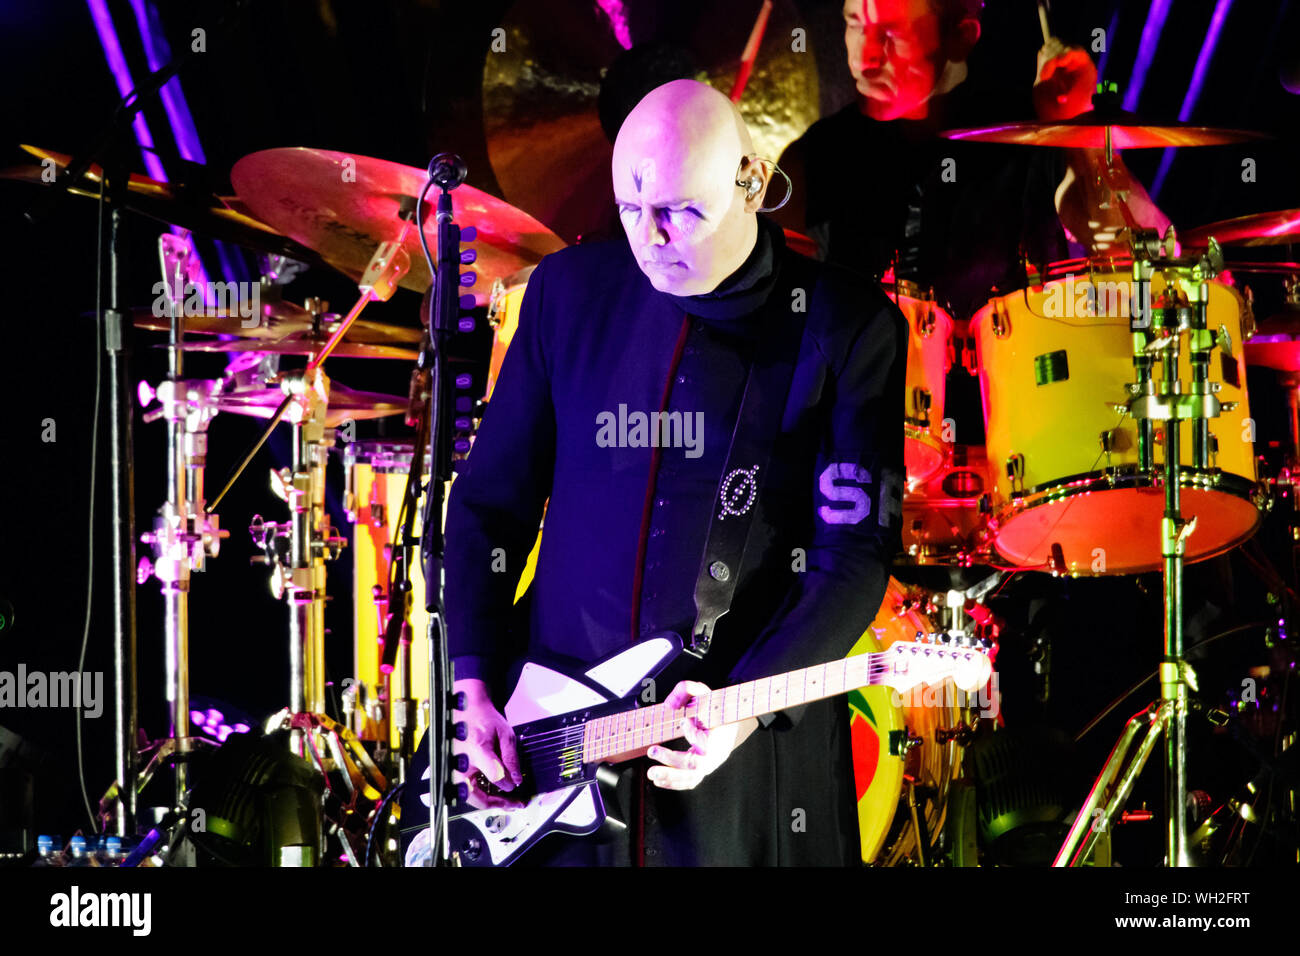 August 28, 2019, Chula Vista, California, U.S: Billy Corgan frontman for The Smashing Pumpkins  performs live at North Island Credit Union Amphitheatre on August 28, 2019 in Chula Vista, California. (Credit Image: © Marissa Carter/ZUMA Wire) Stock Photo